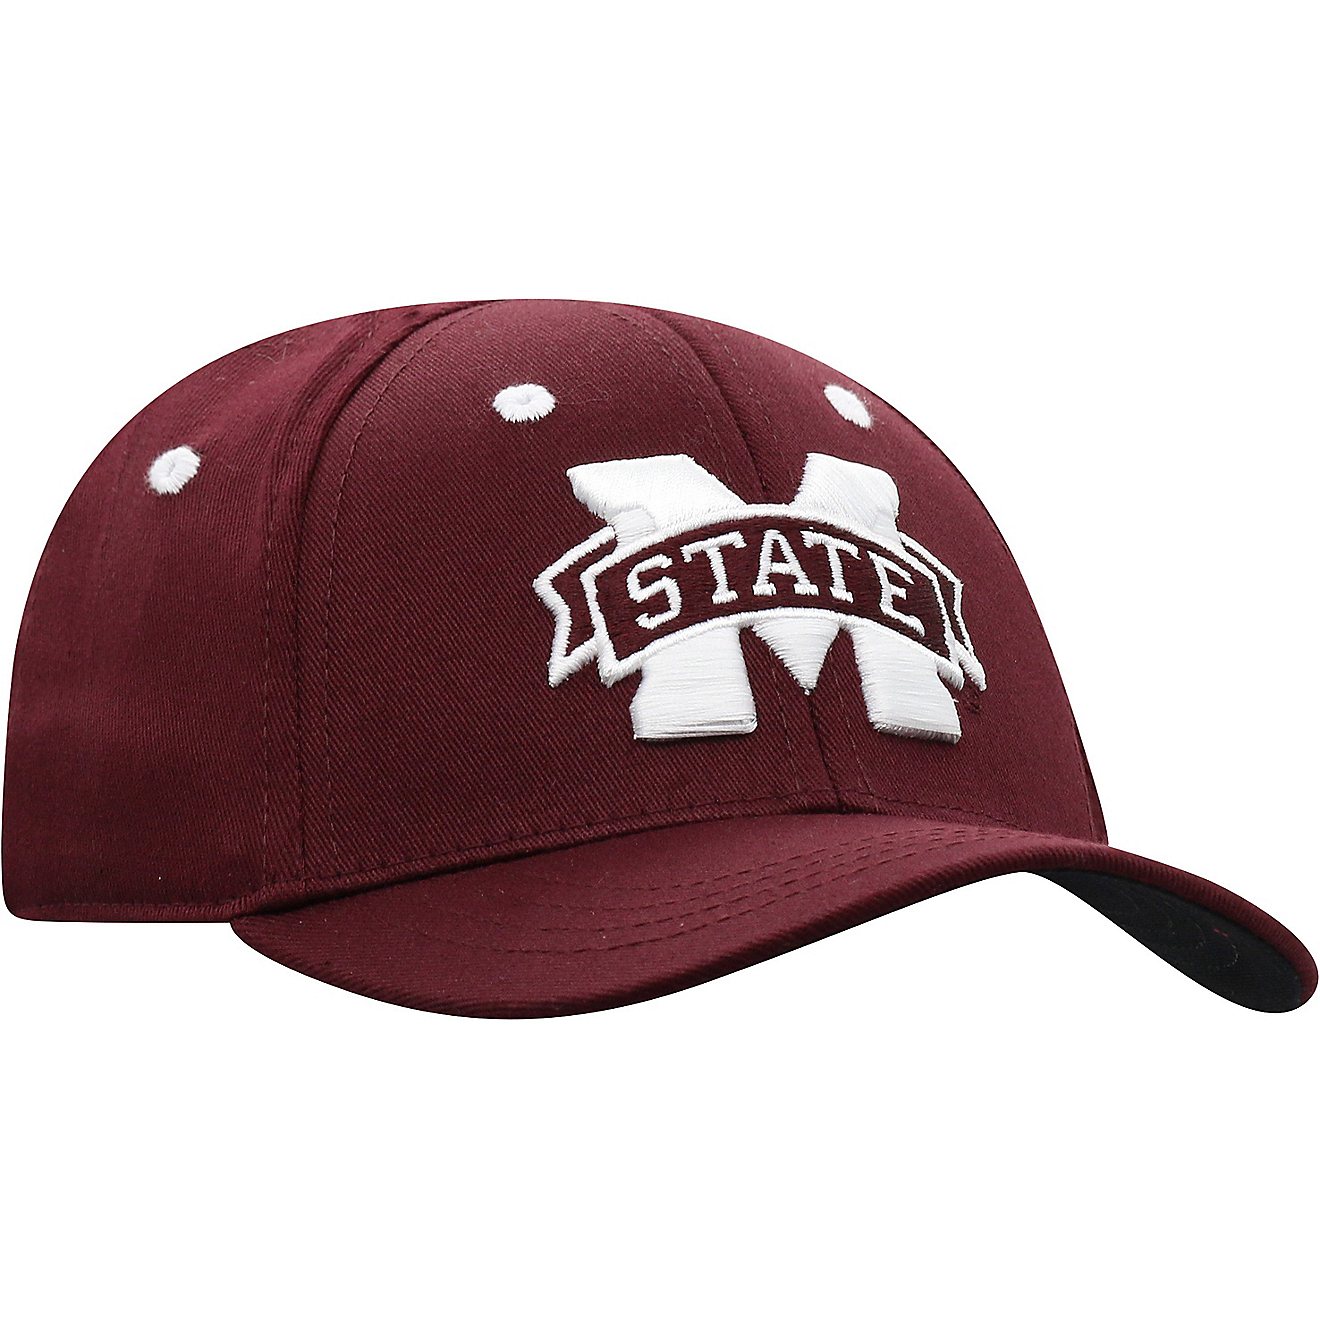 Top of the World Infants' Mississippi State University Cub Cap                                                                   - view number 4